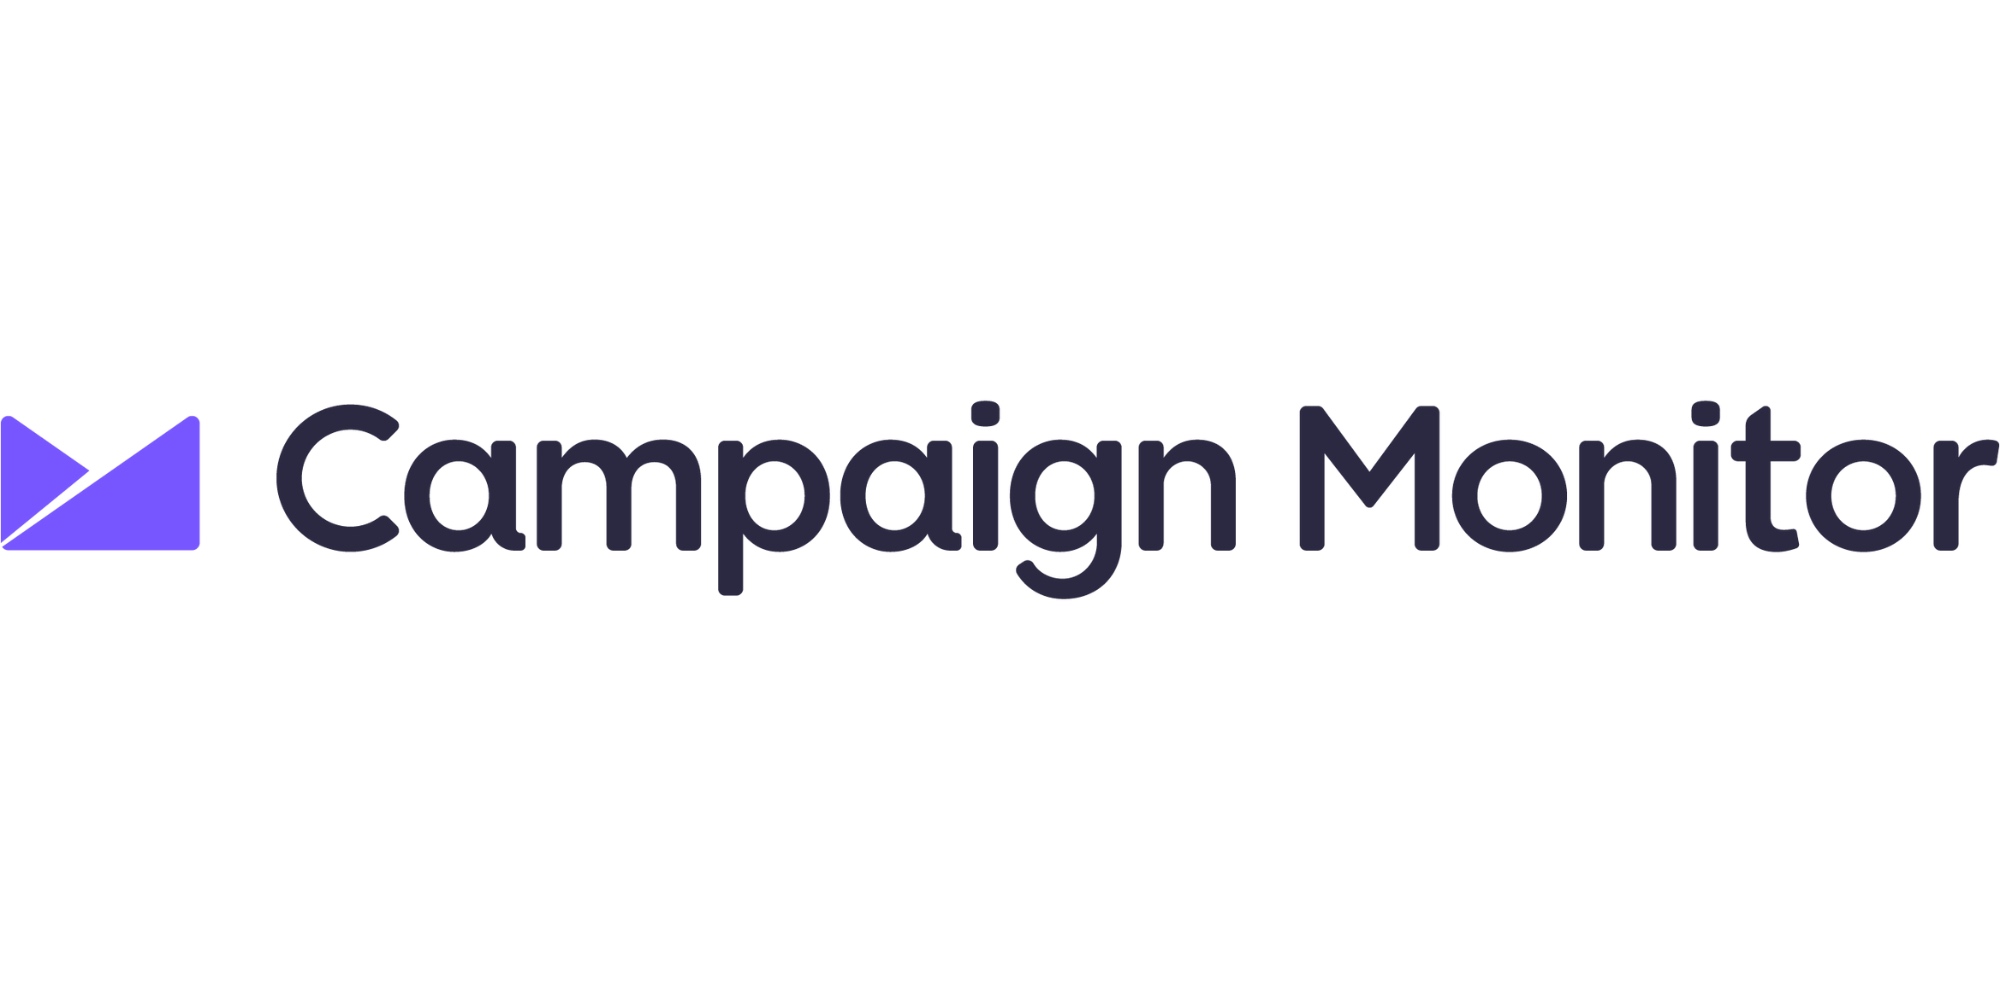 Campaign Monitor is a great alternative to Mailchimp for churches